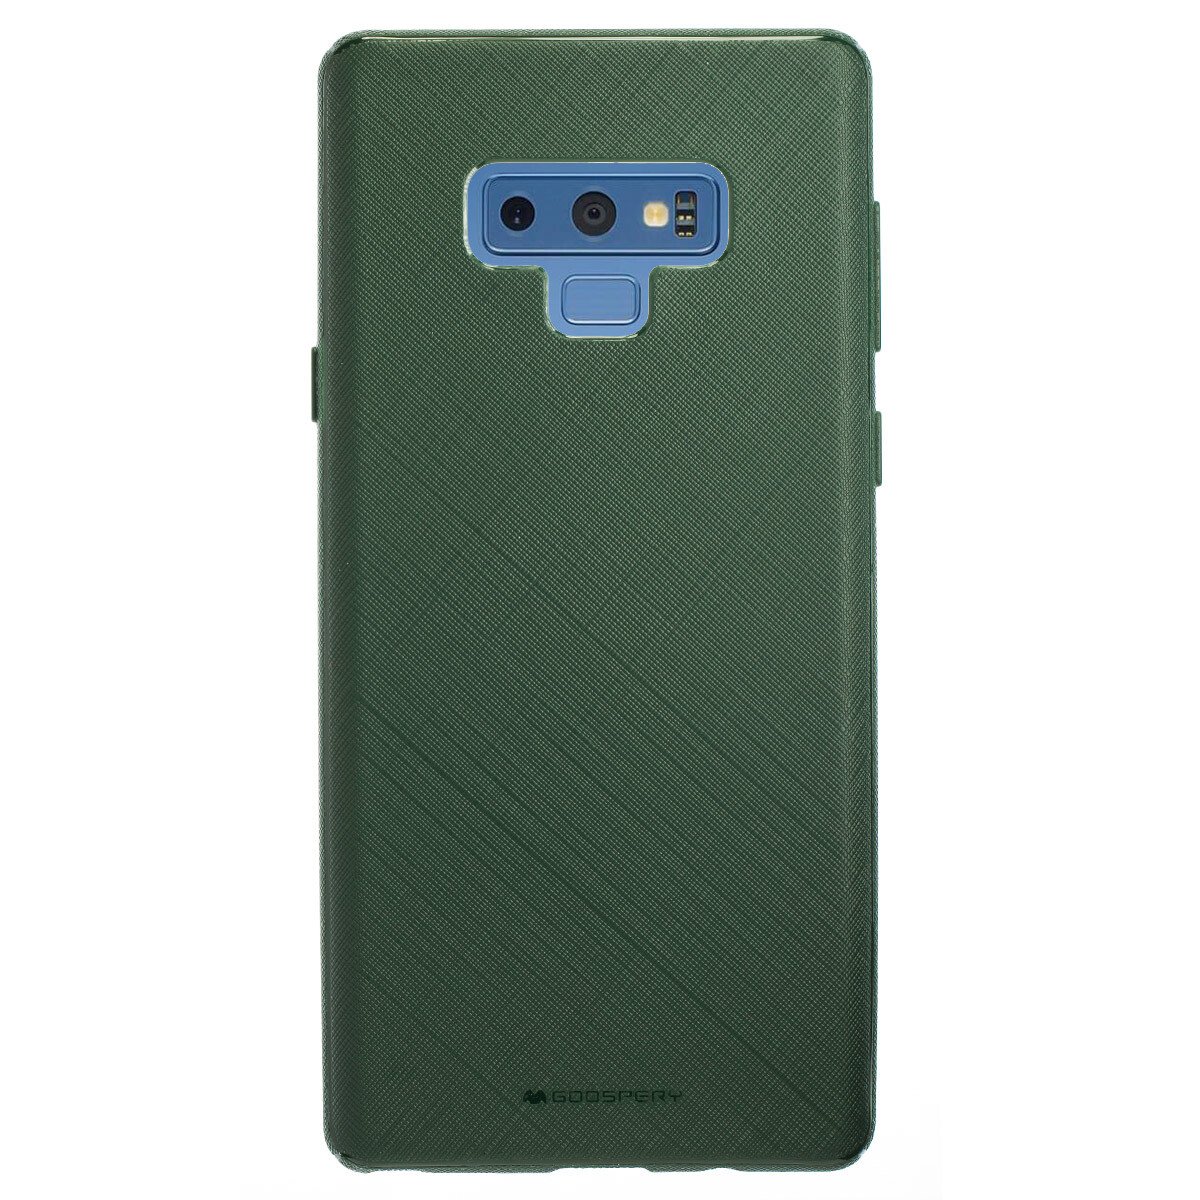 Husa Silicon Samsung Galaxy Note 9, Stylelux Verde thumb